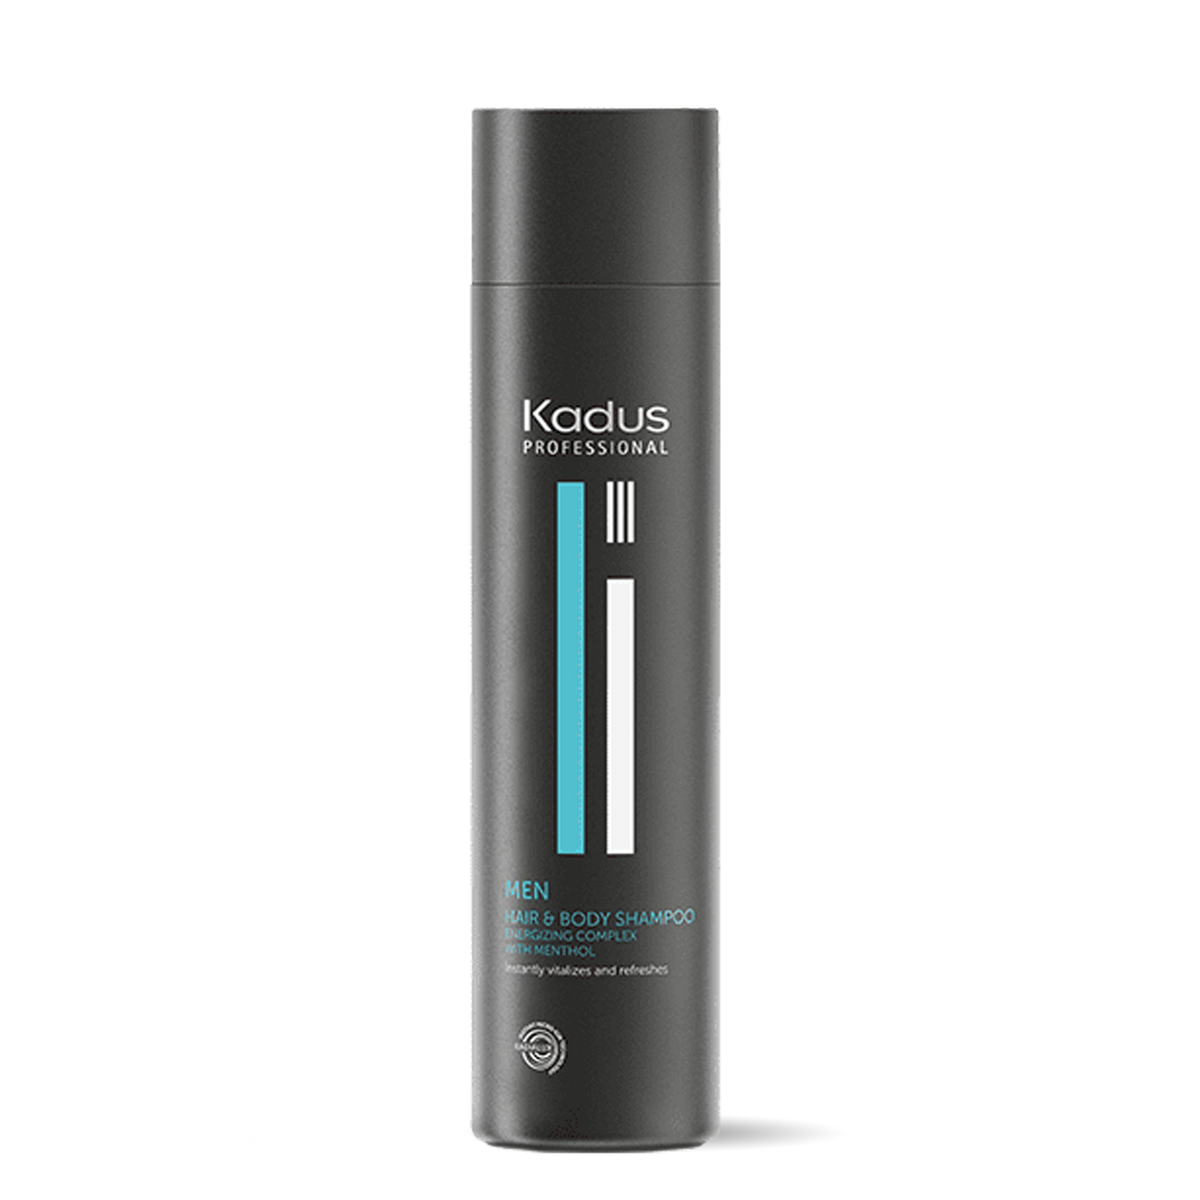 Kadus Men’s Hair And Body Shampoo 250ml - by Kadus Professionals |ProCare Outlet|